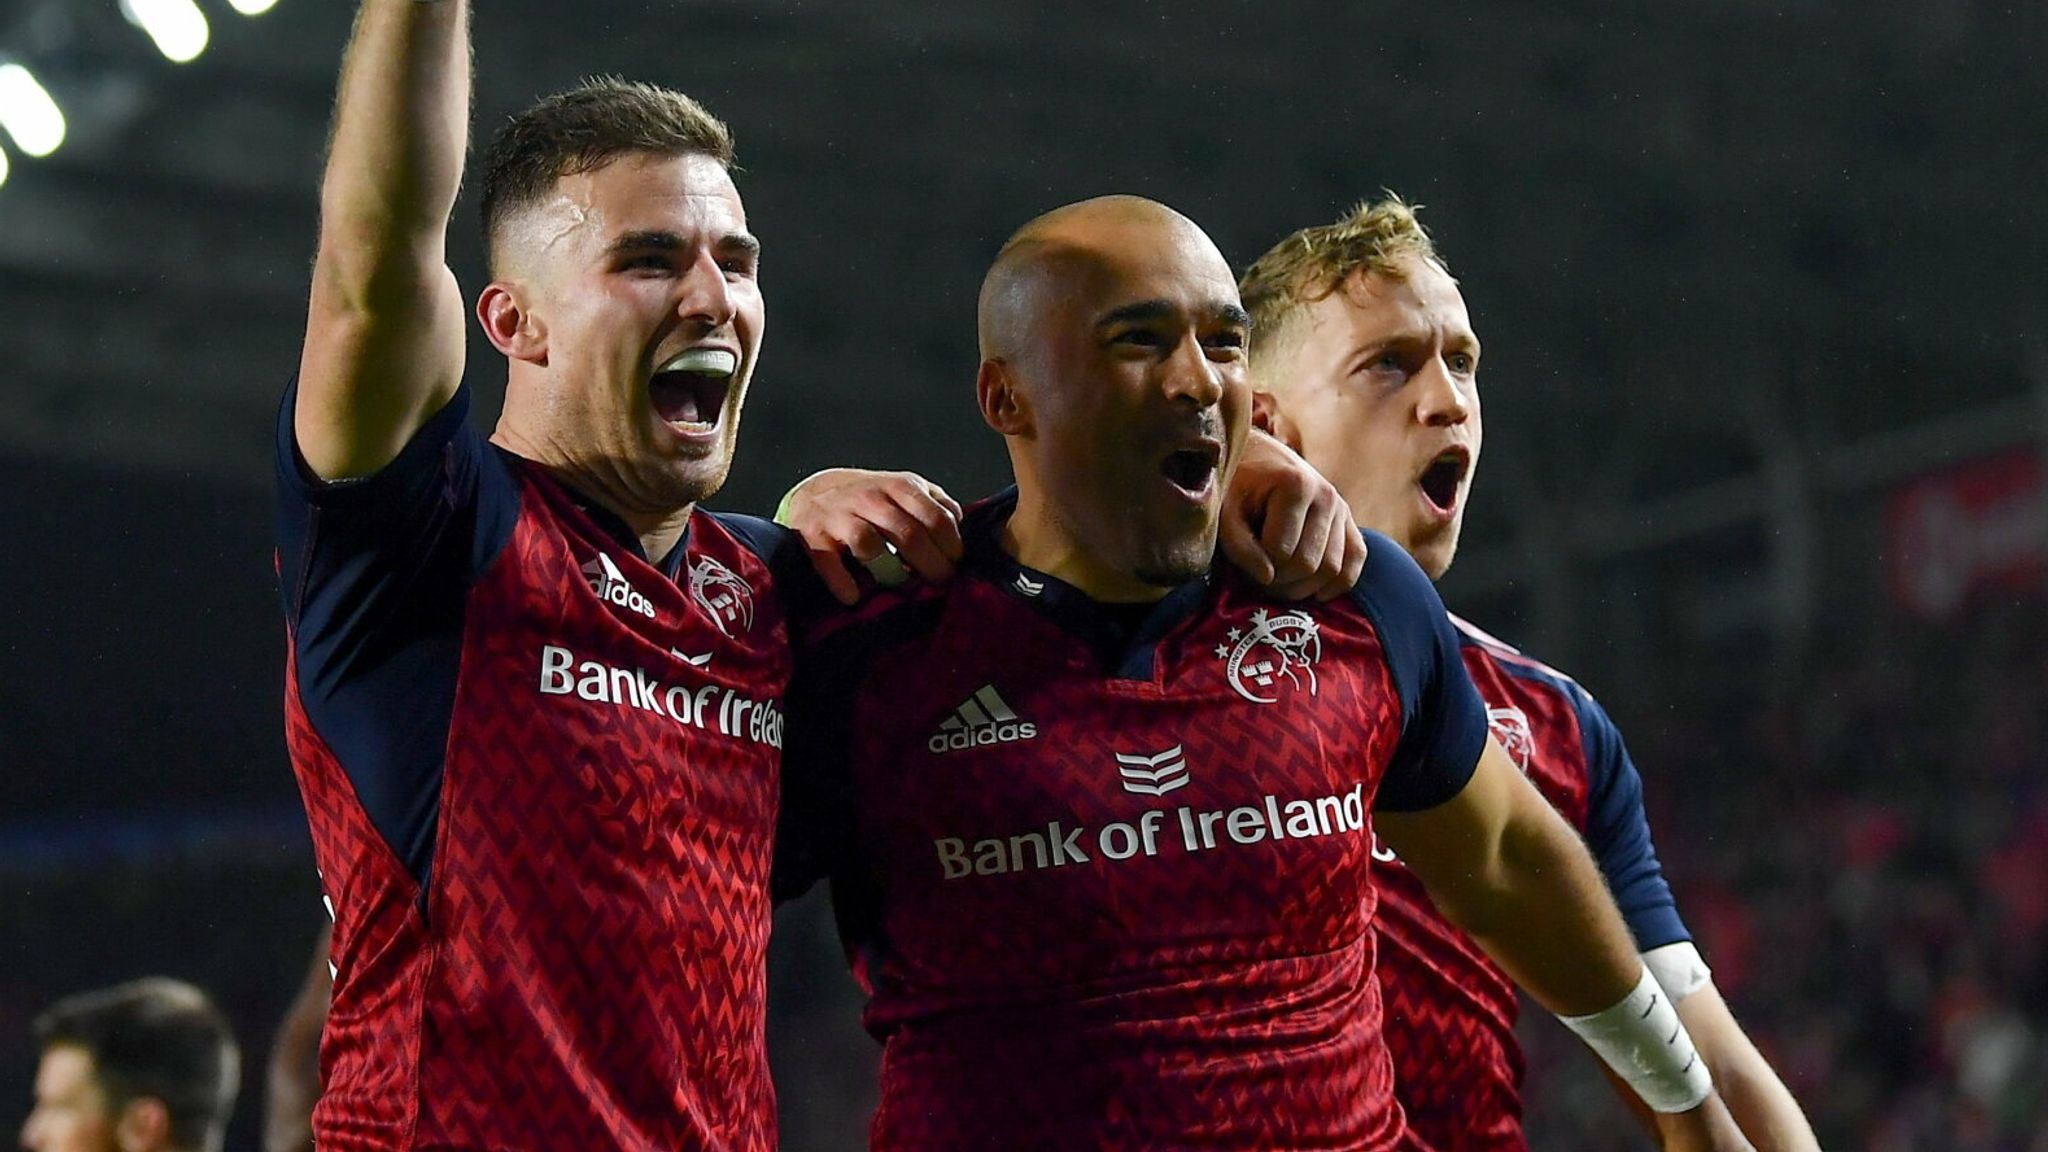 Munster 28-14 South Africa Sensational hosts post historic win at Pairc Ui Chaoimh in Cork Rugby Union News Sky Sports